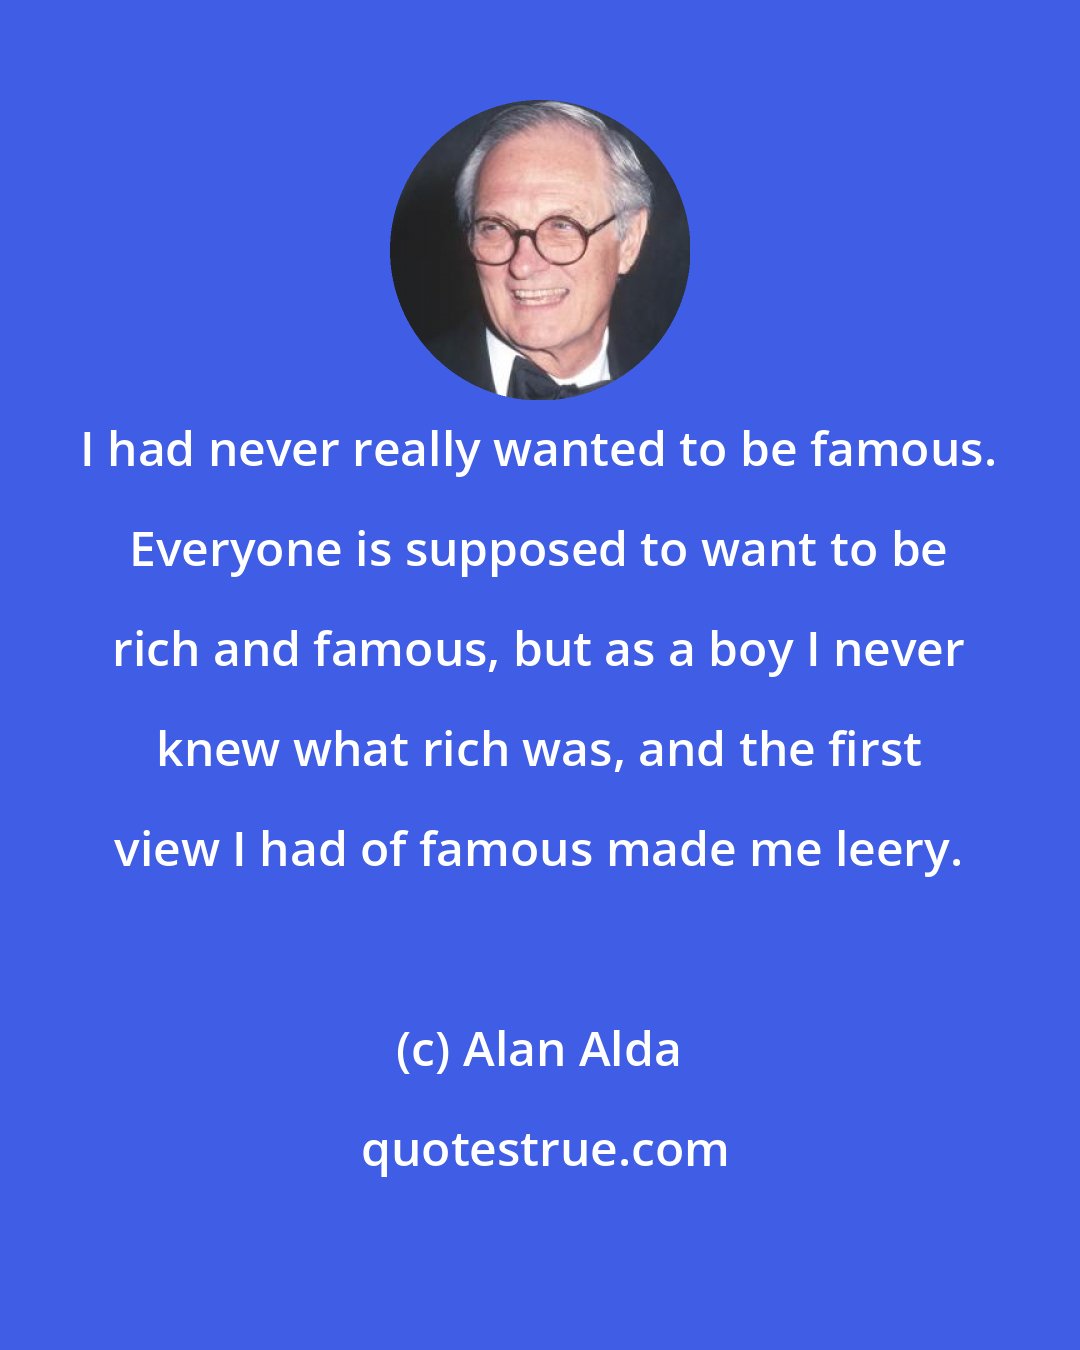 Alan Alda: I had never really wanted to be famous. Everyone is supposed to want to be rich and famous, but as a boy I never knew what rich was, and the first view I had of famous made me leery.